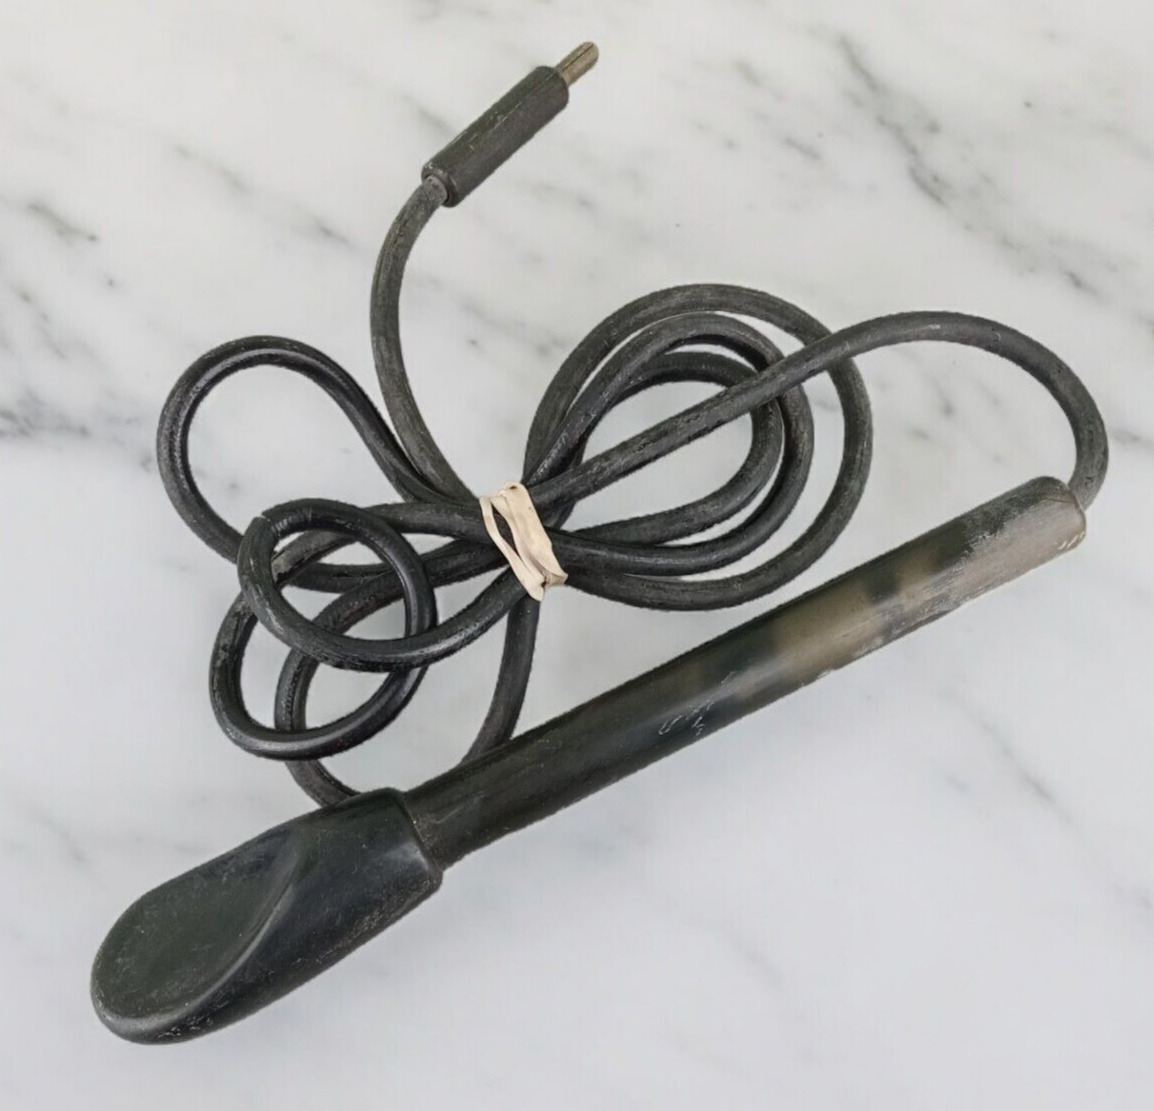 Unknown Antique Vintage Medical Surgical Instrument Tool Device Probe Oddity